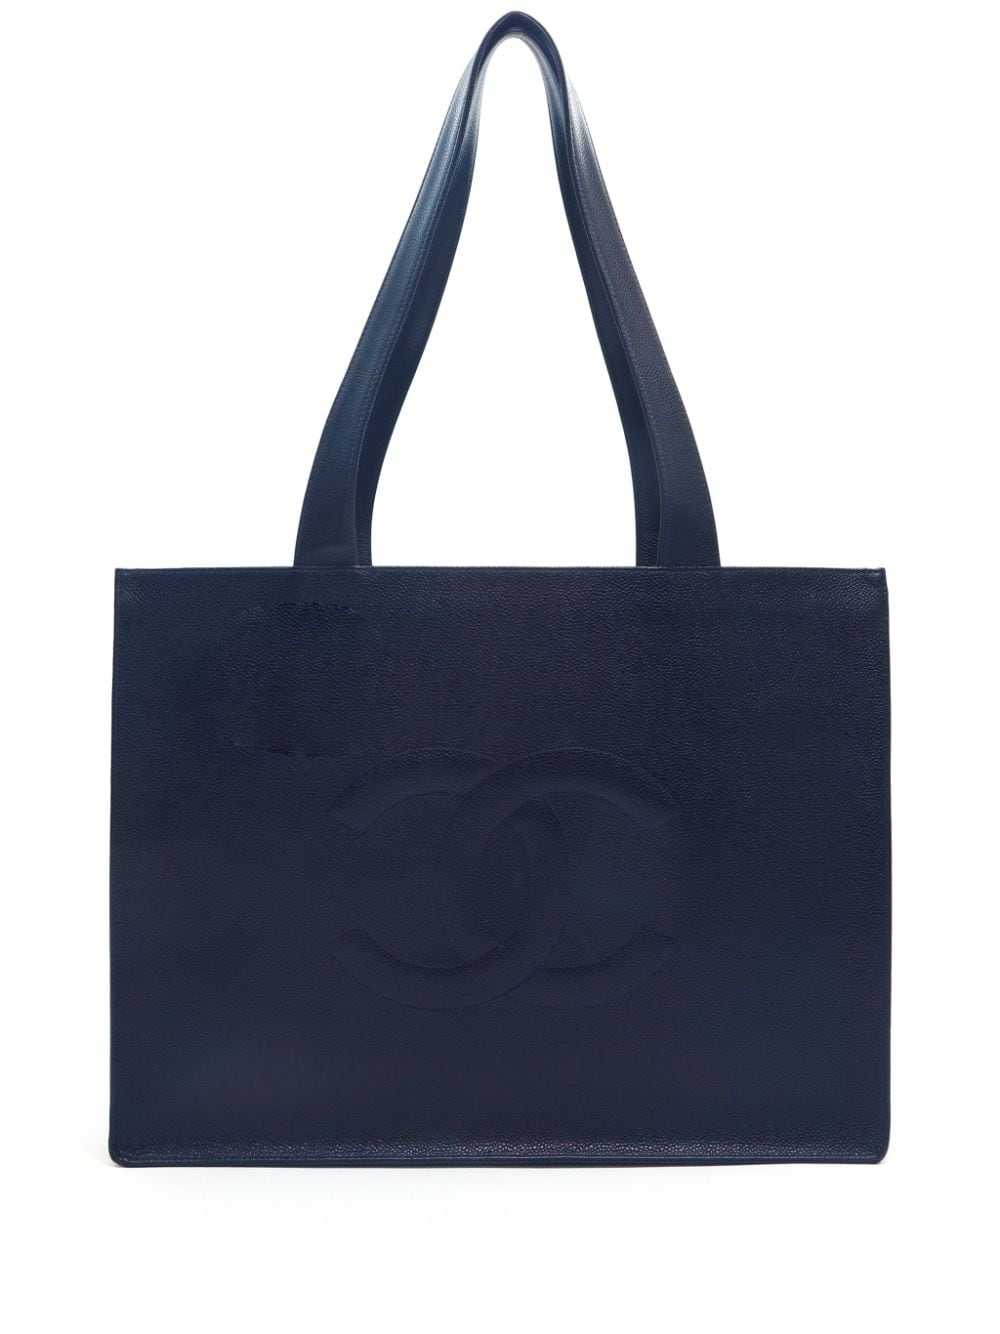 CHANEL Pre-Owned 1998 Interlocking CC tote bag - … - image 1